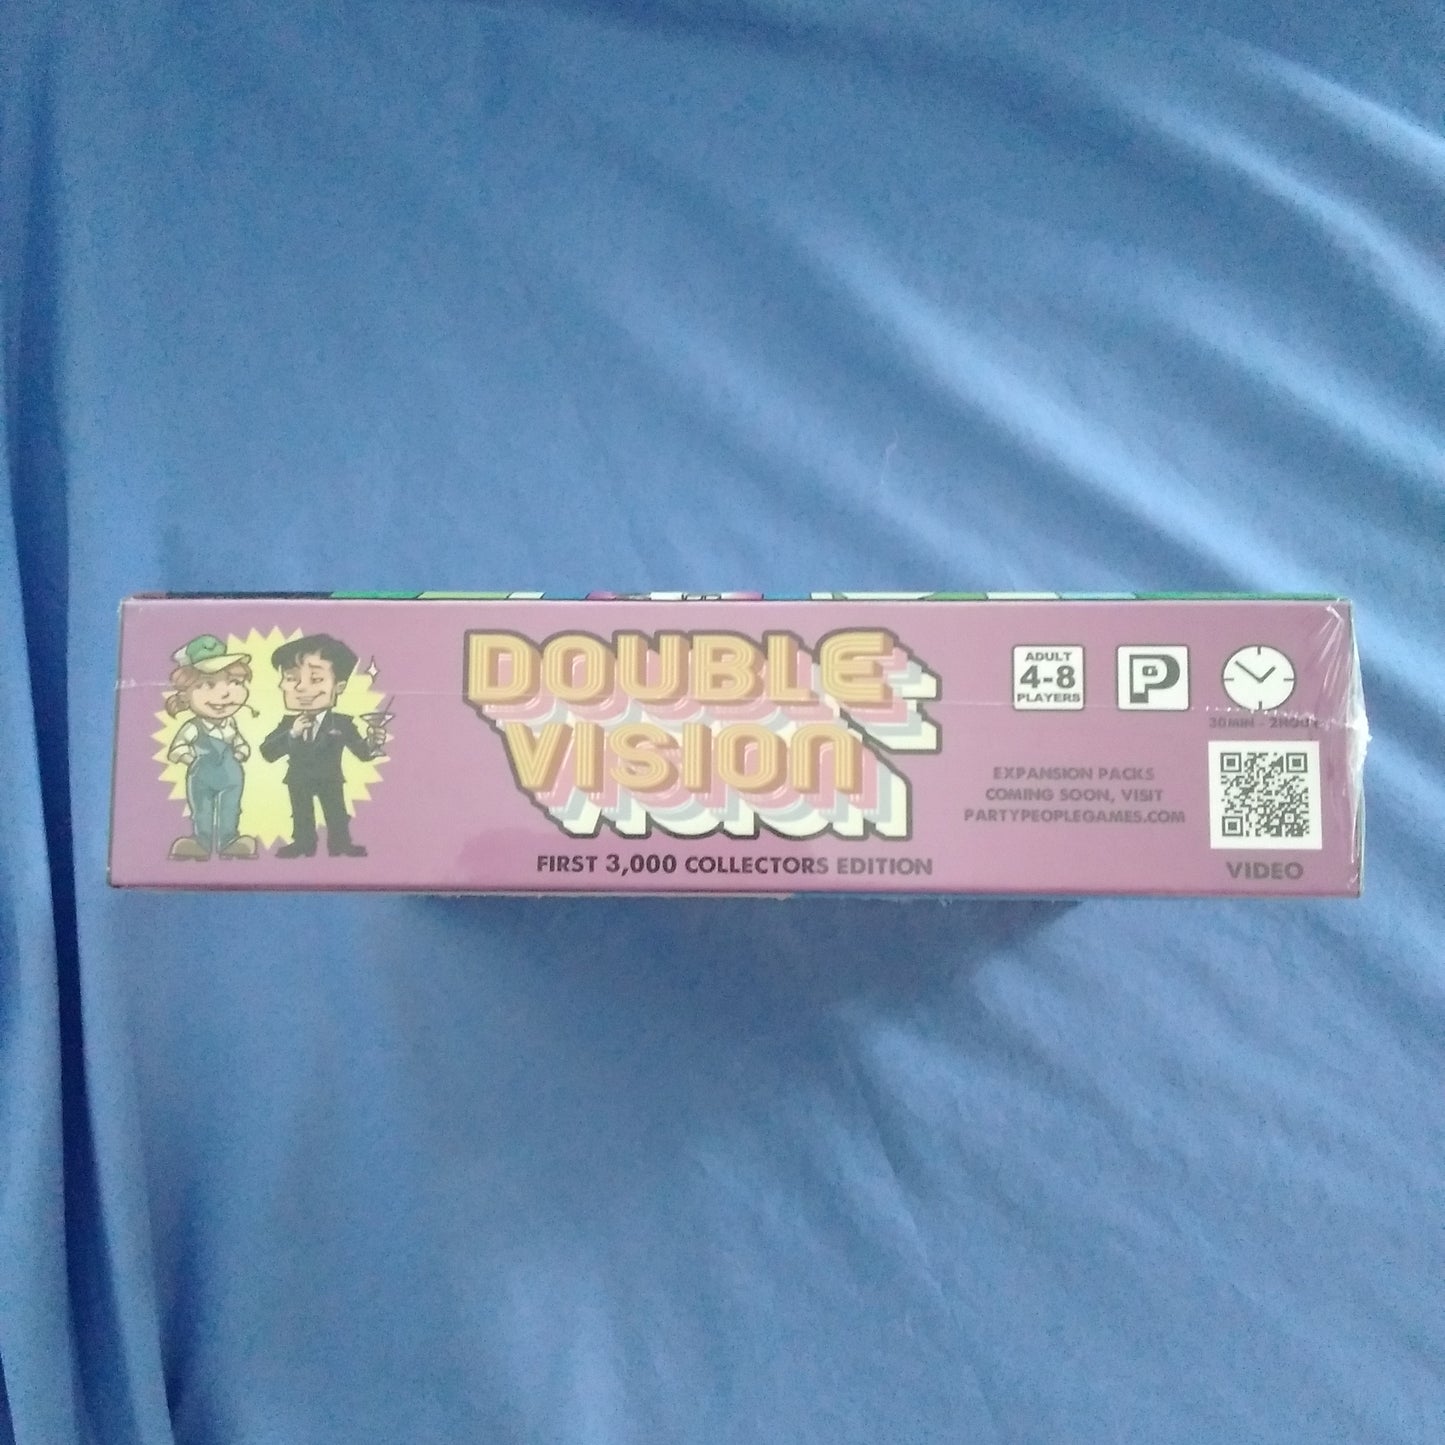 DOUBLE VISION Party Game by Party People Games - NIB